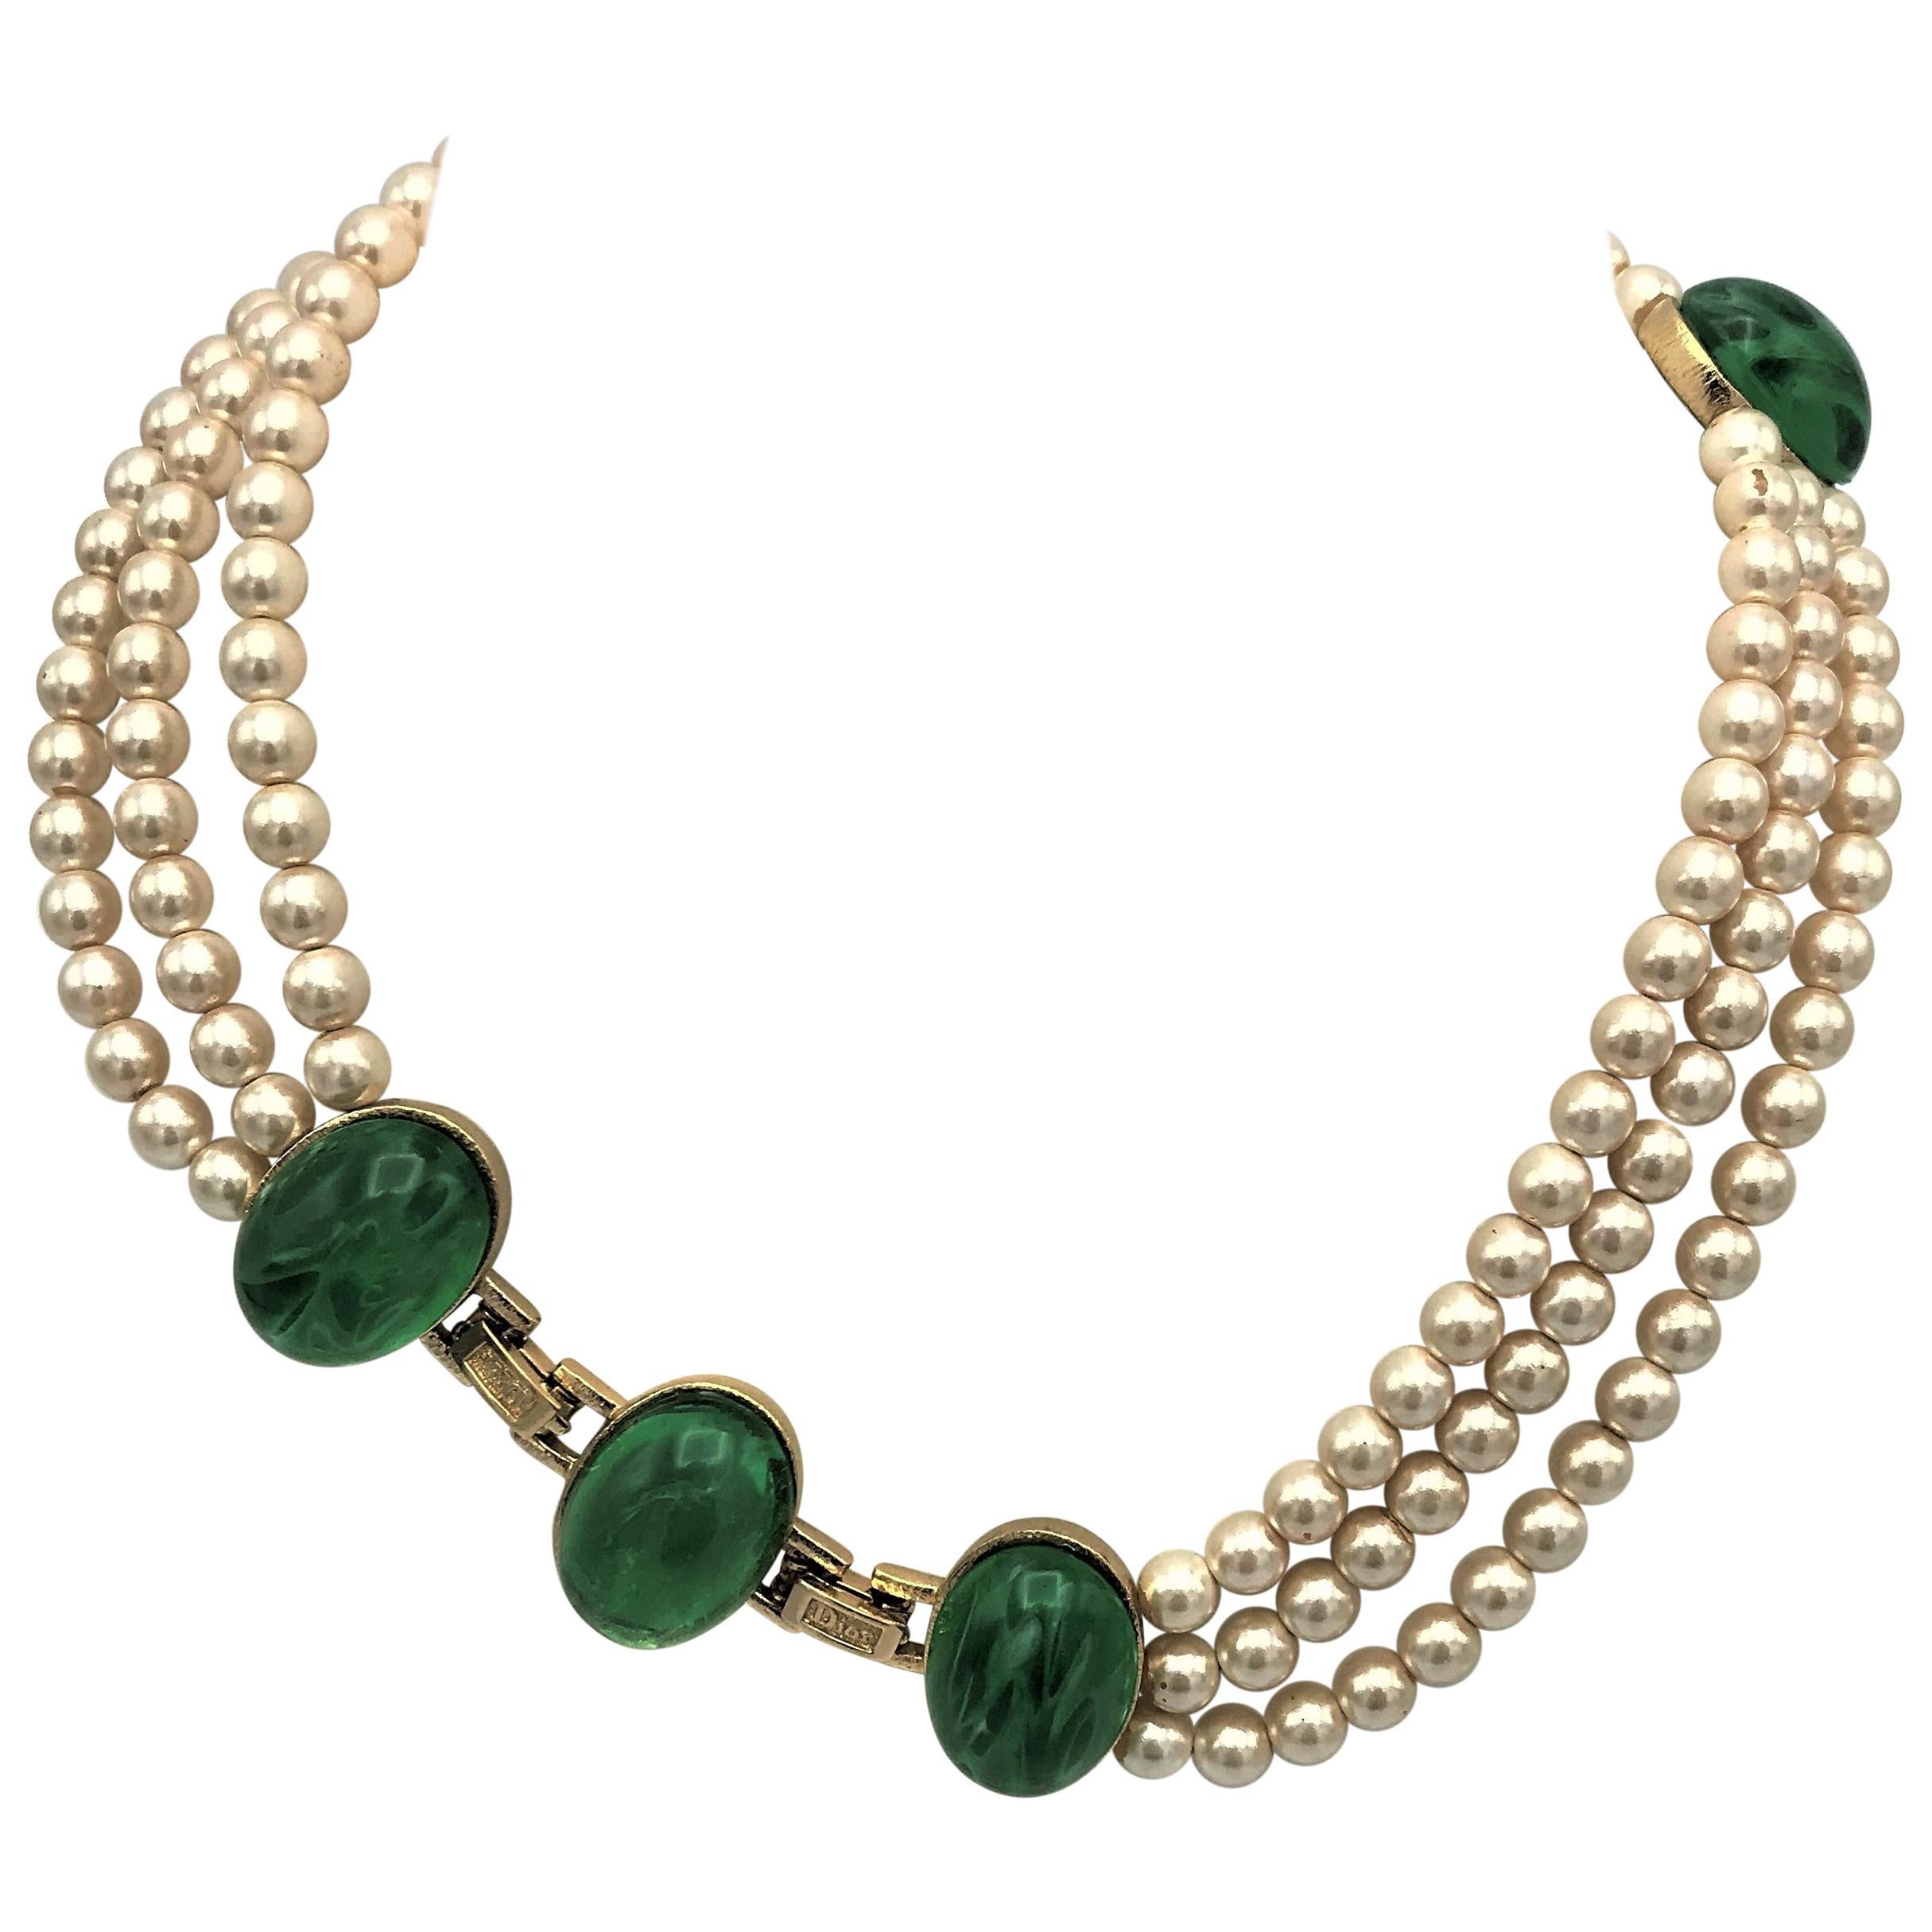 Vintage Christian Dior Necklace 1970-80 Faux Pearls with Green Gripoix